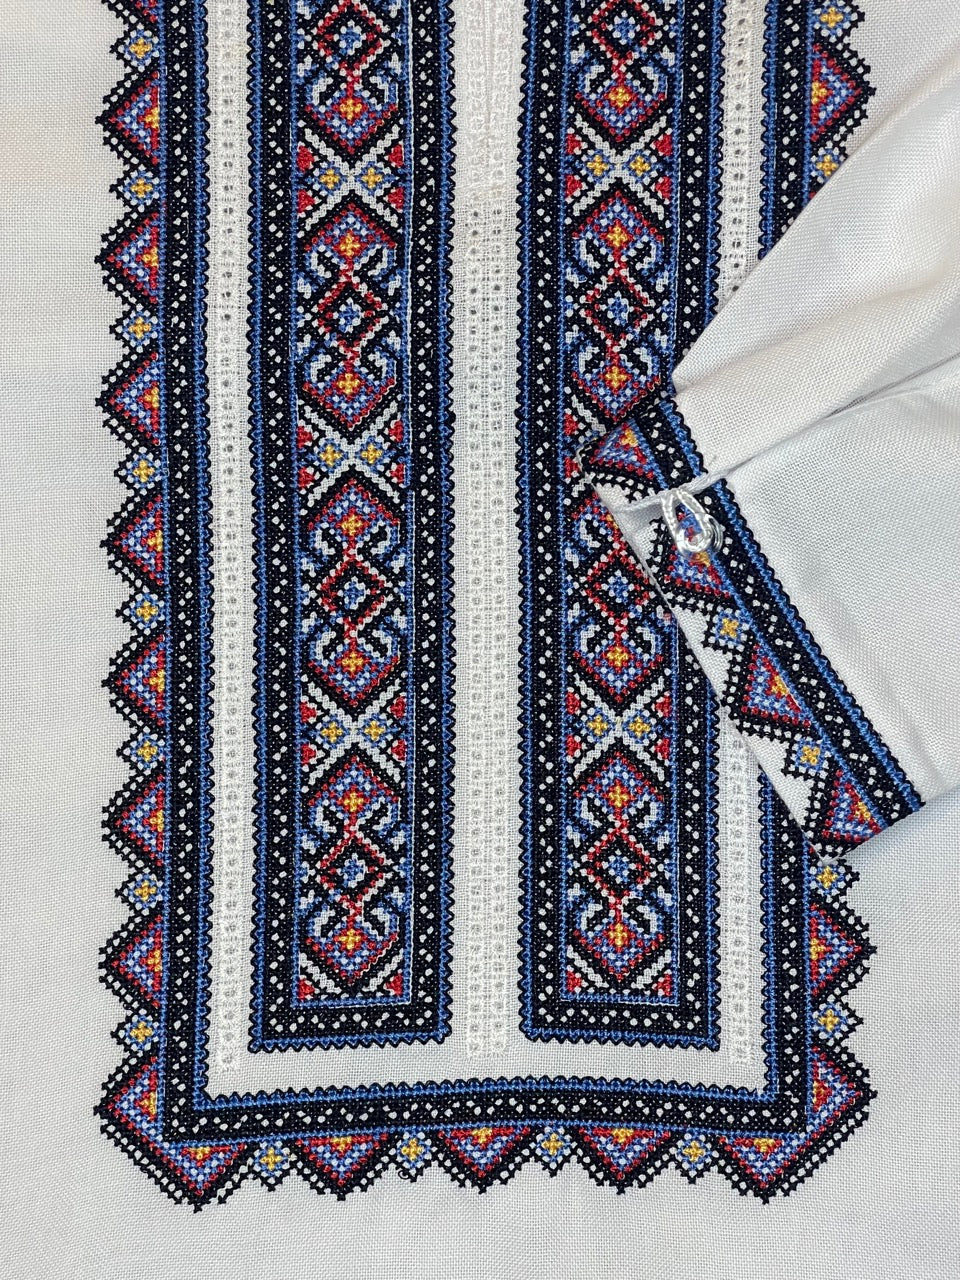 White Men's Vyshyvanka Shirt with Colourful Embroidery